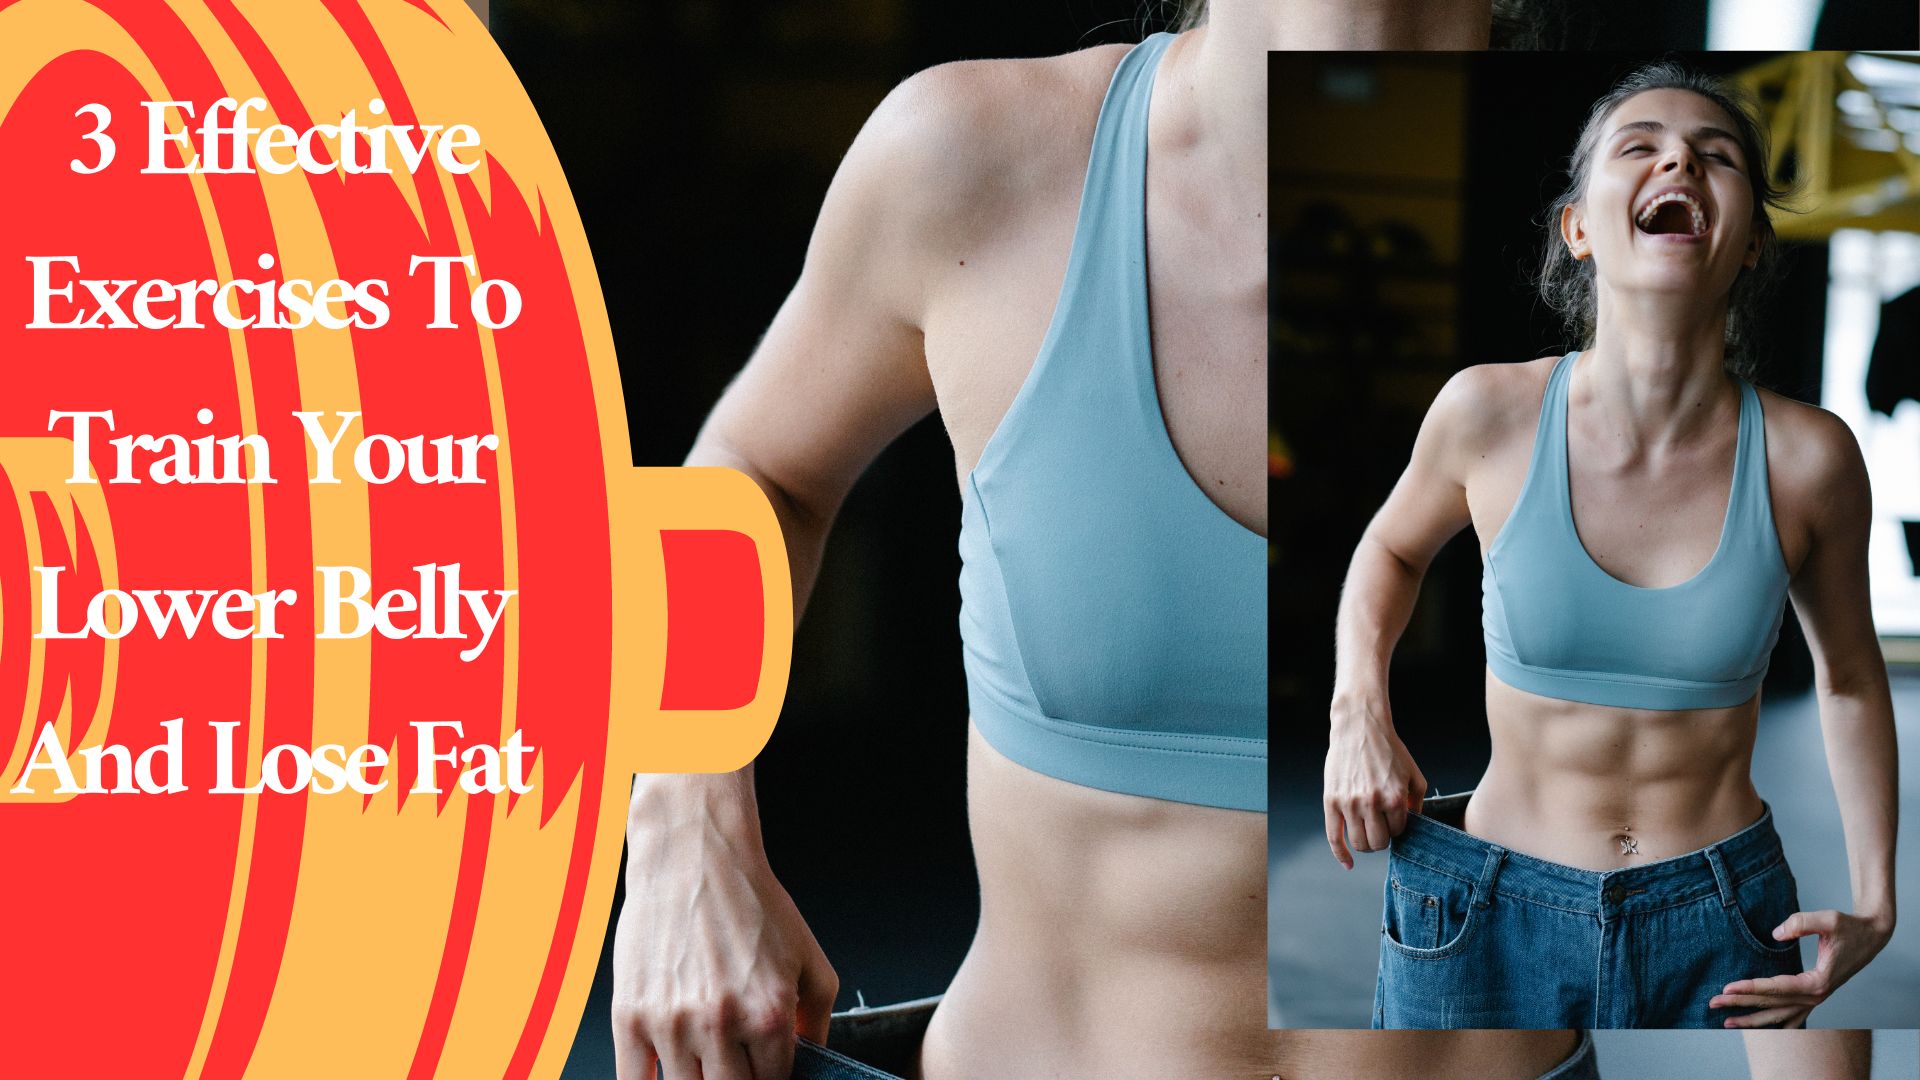 3 Effective Exercises To Train Your Lower Belly And Lose Fat